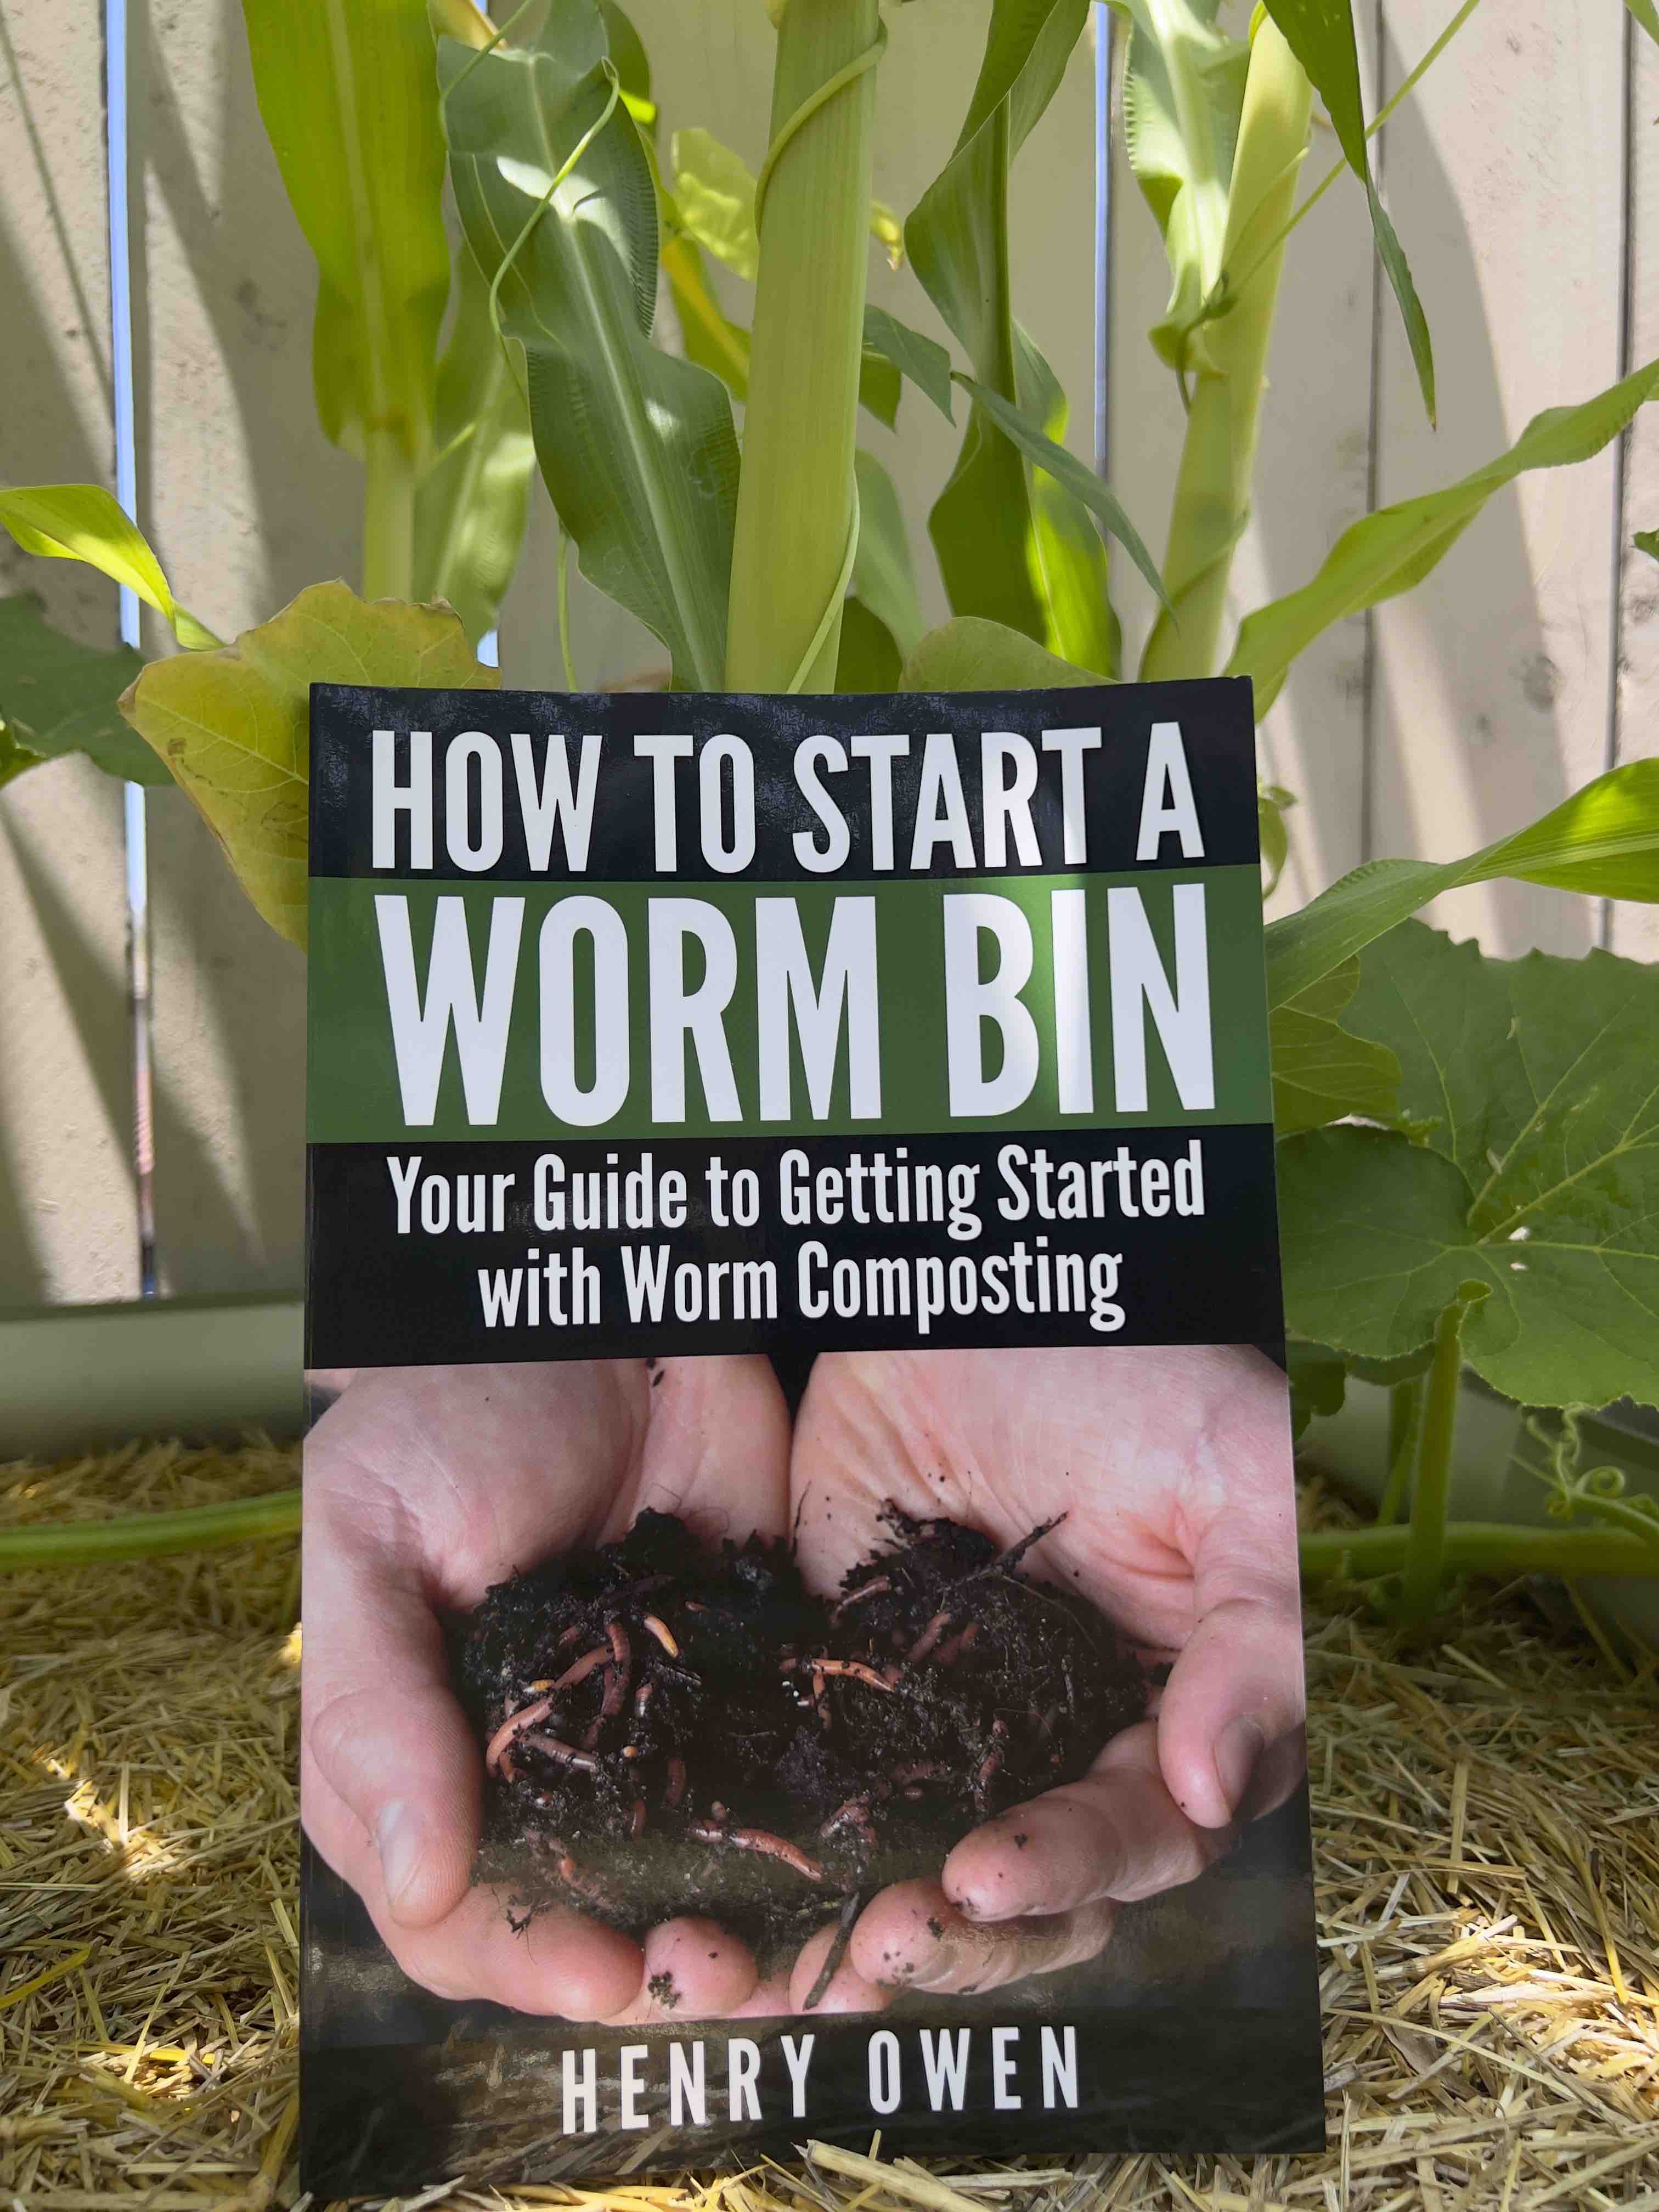 How To Start A Worm Bin Meme's Worms